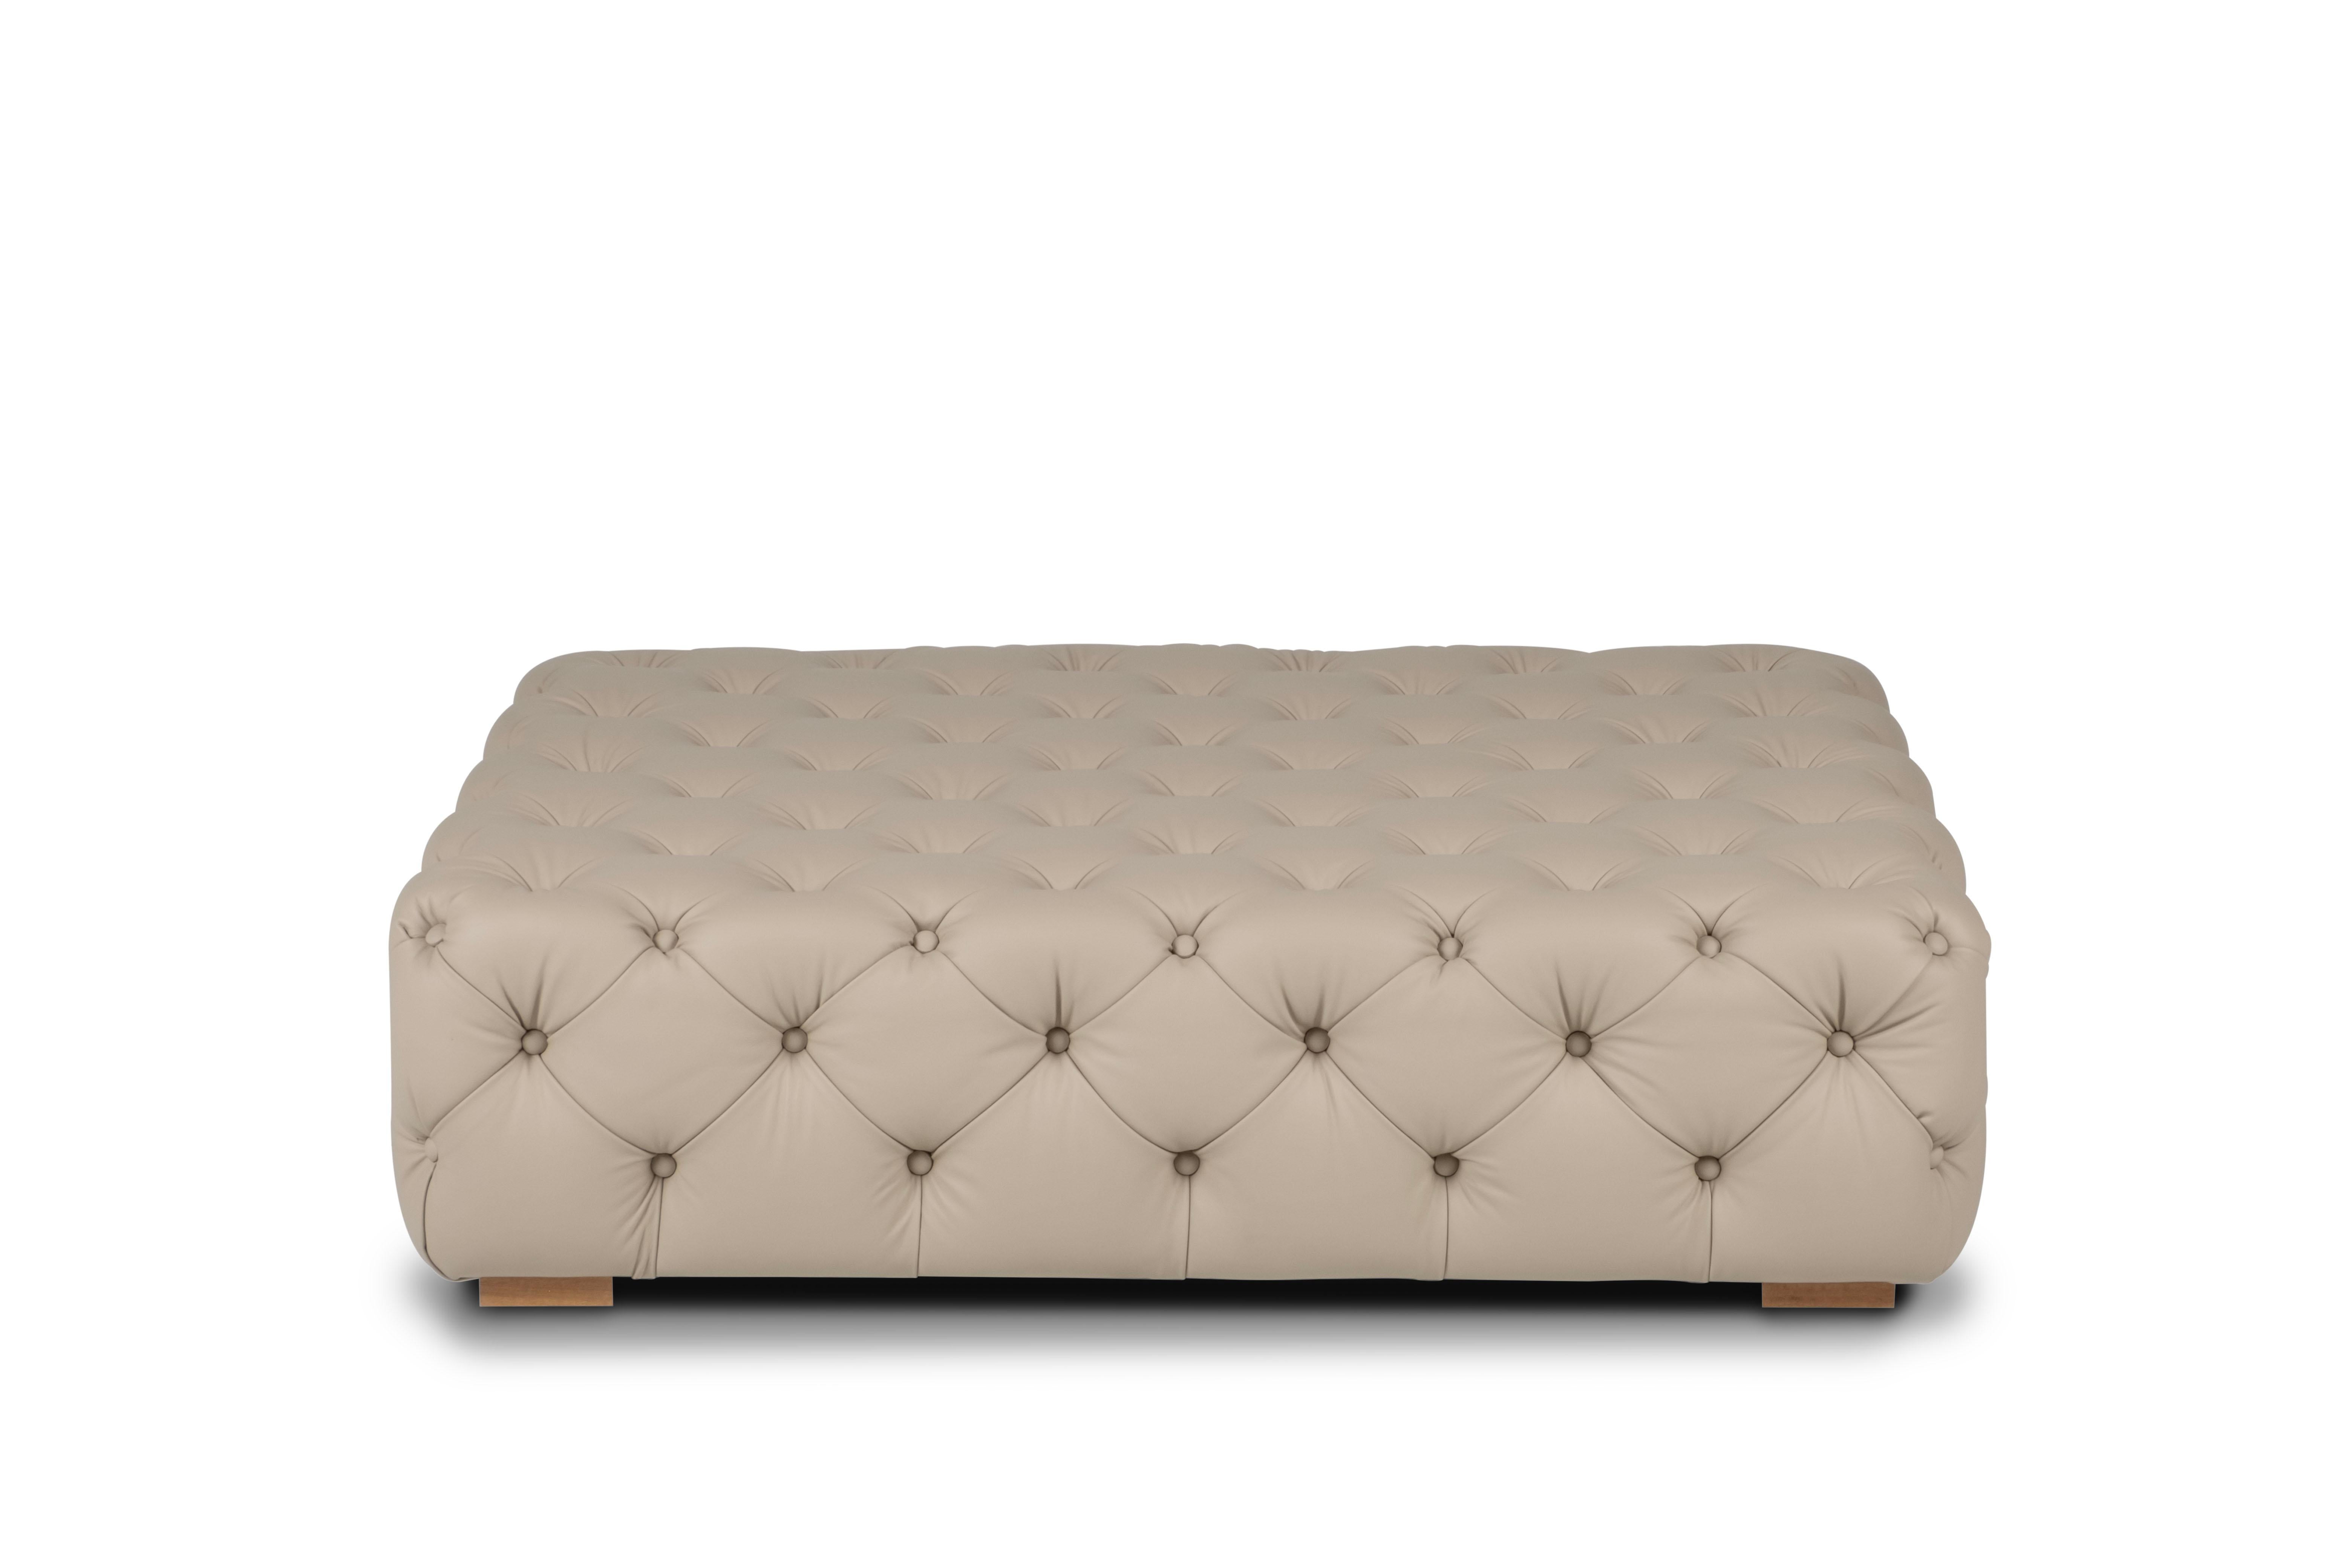 Neoclassical Plaza Ottoman, Modern Collection, Handcrafted in Portugal - Europe by GF Modern.

A comfy ottoman with a luxurious touch. Upholstered in high standard Italian beige leather, Plaza stands out on its own with it's Capitoné upholstery in